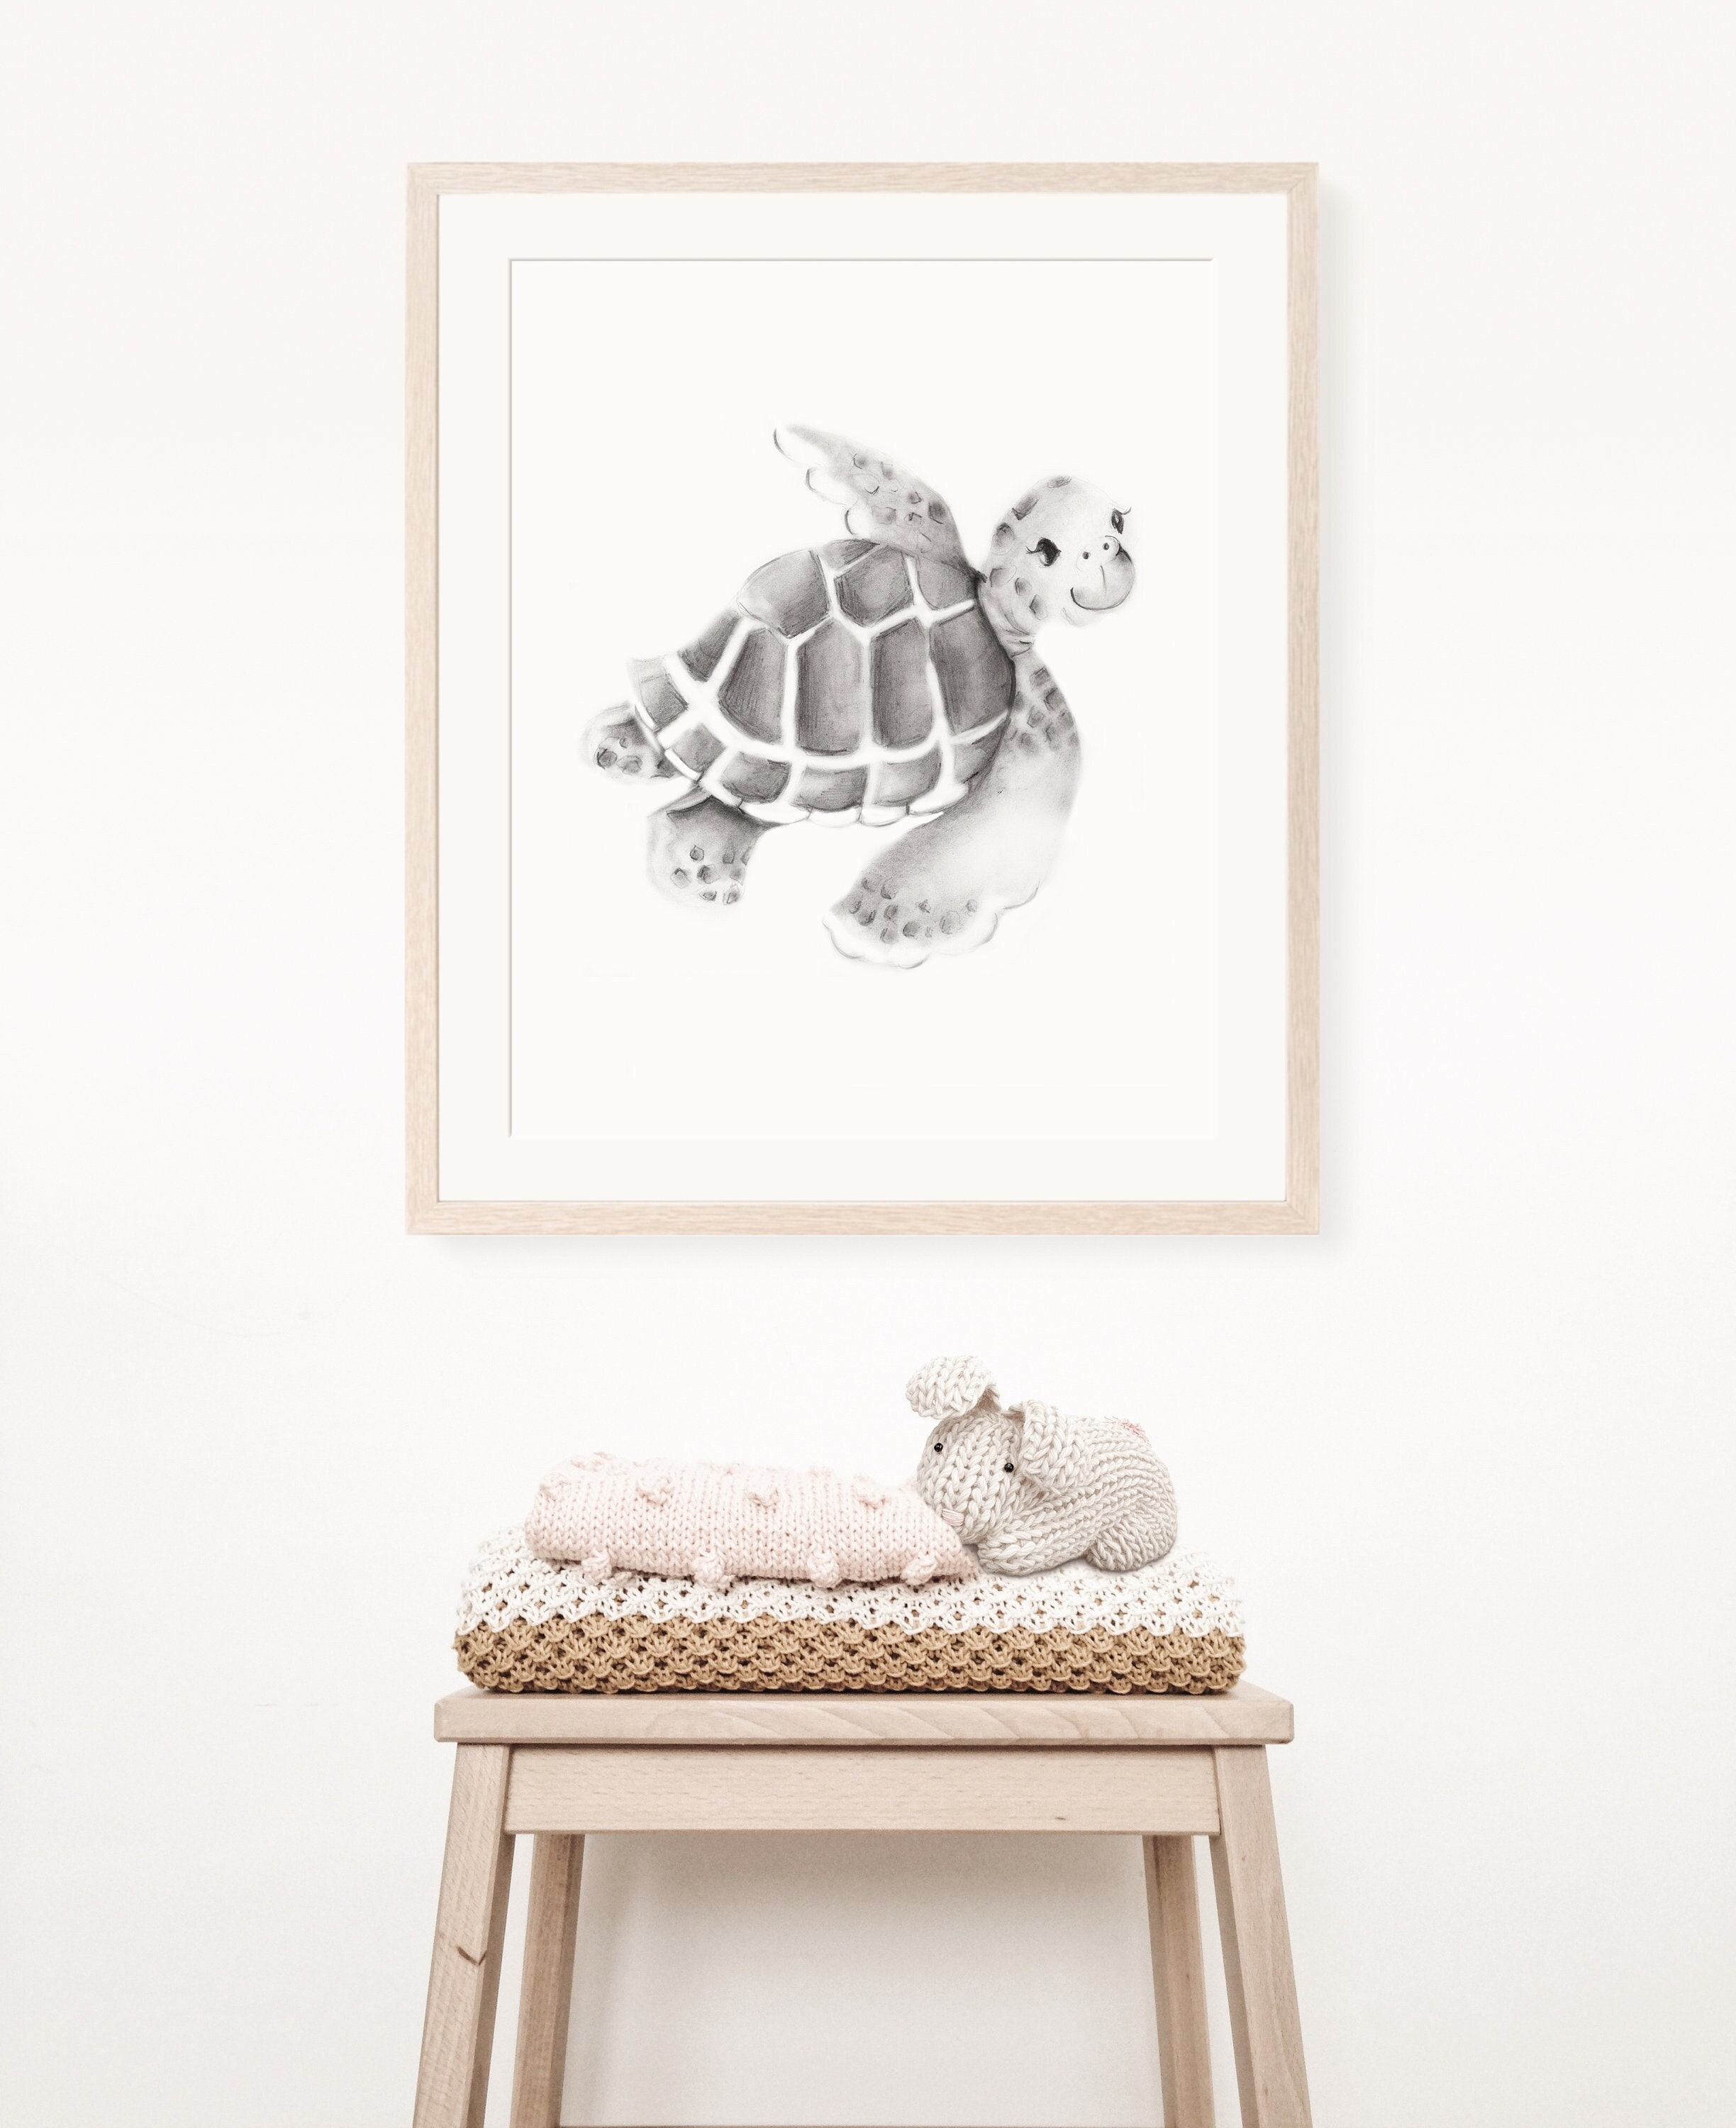 Black and white pencil drawing of a turtle